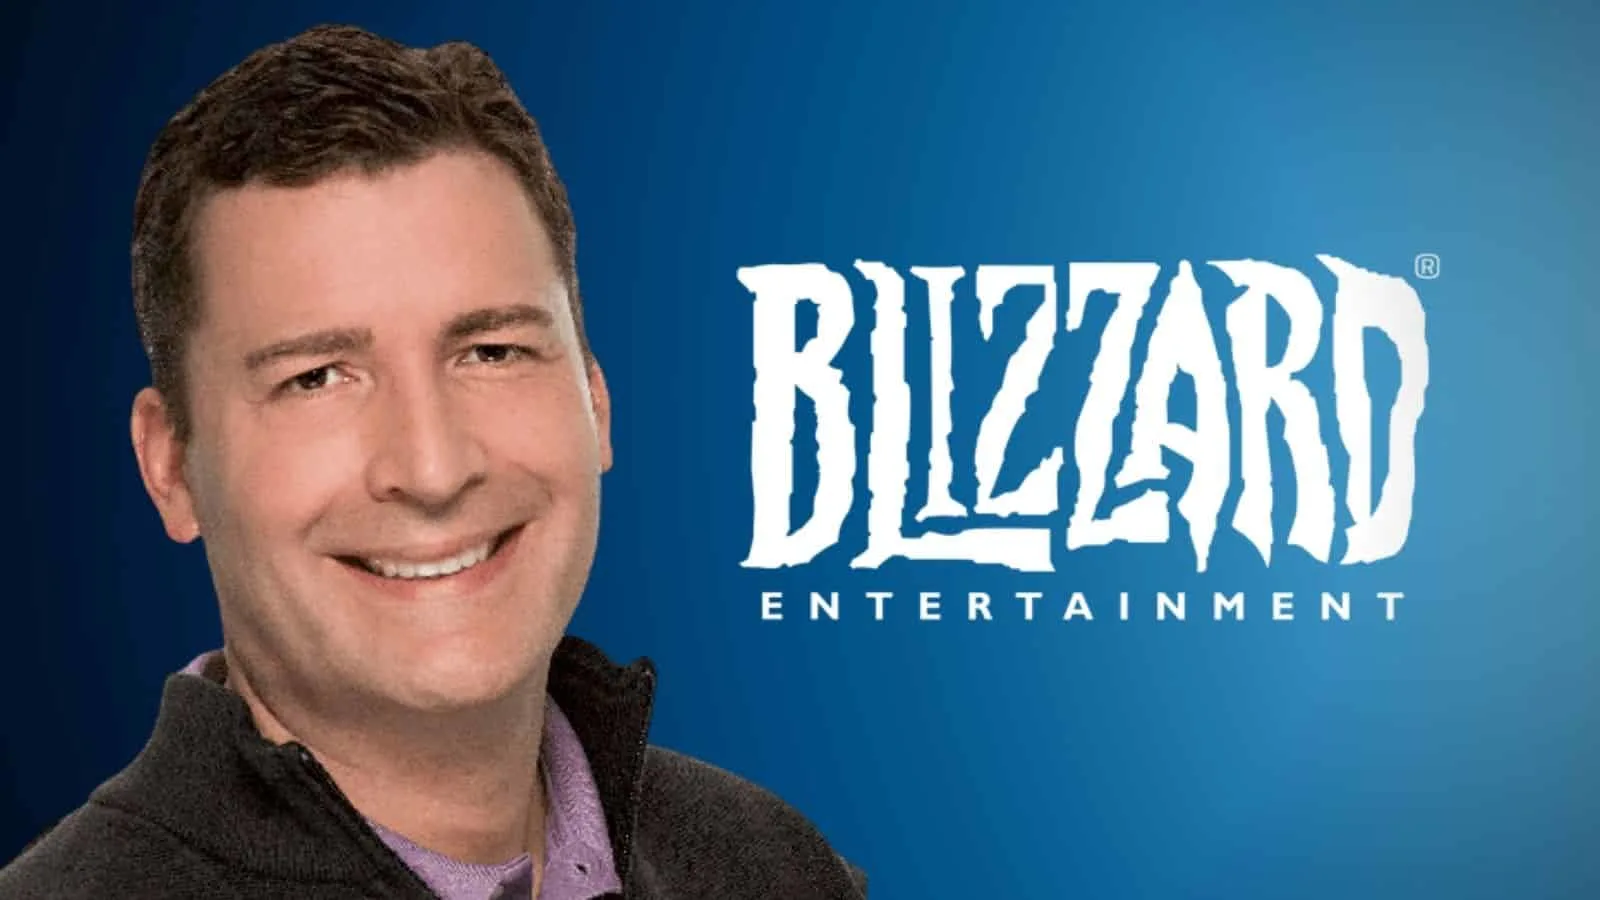 Blizzard's Mike Ybarra Shares Letter With the Community Saying They Are Working to Rebuild Trust 3